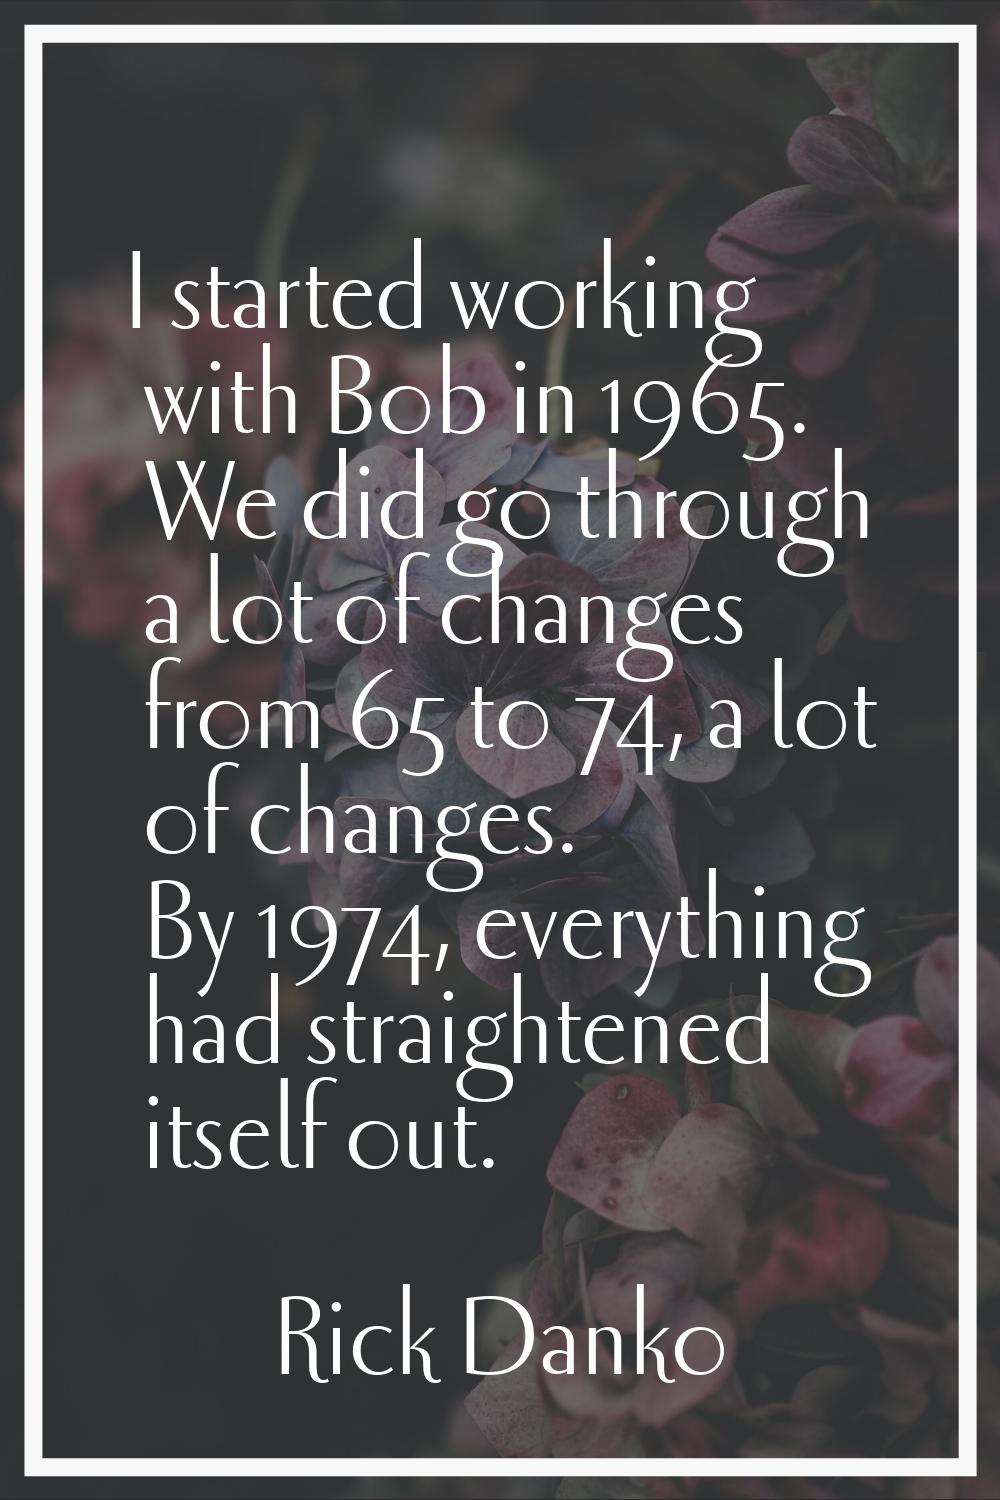 I started working with Bob in 1965. We did go through a lot of changes from 65 to 74, a lot of chan